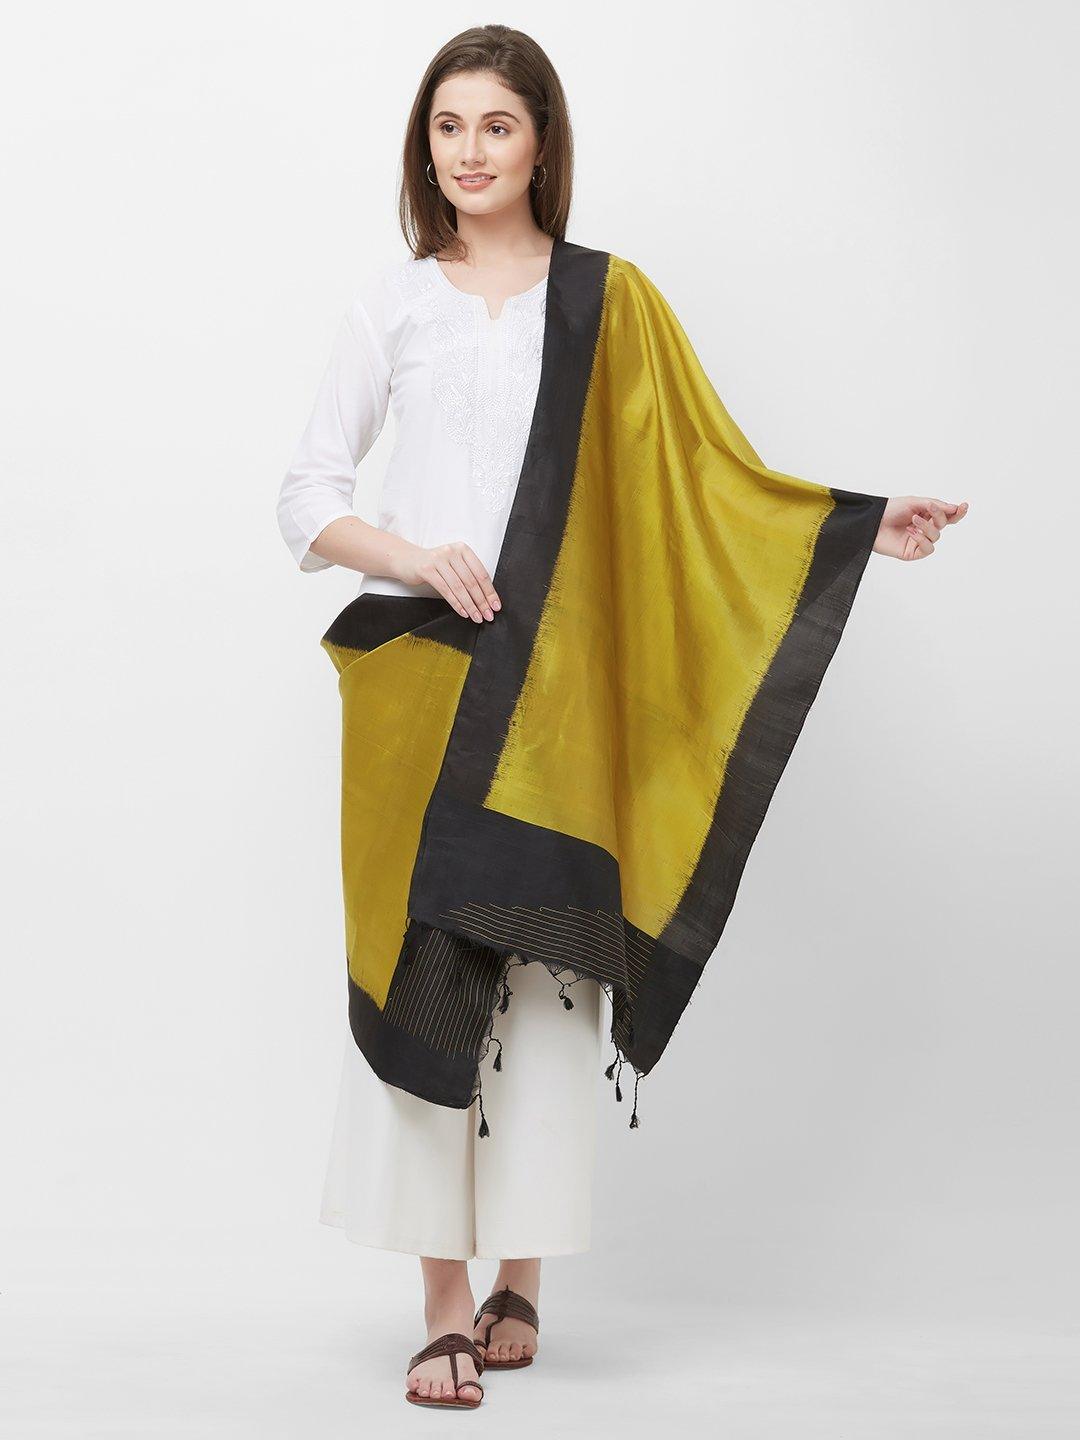 CraftsCollection.in -Golden and Black Pure Silk Stole